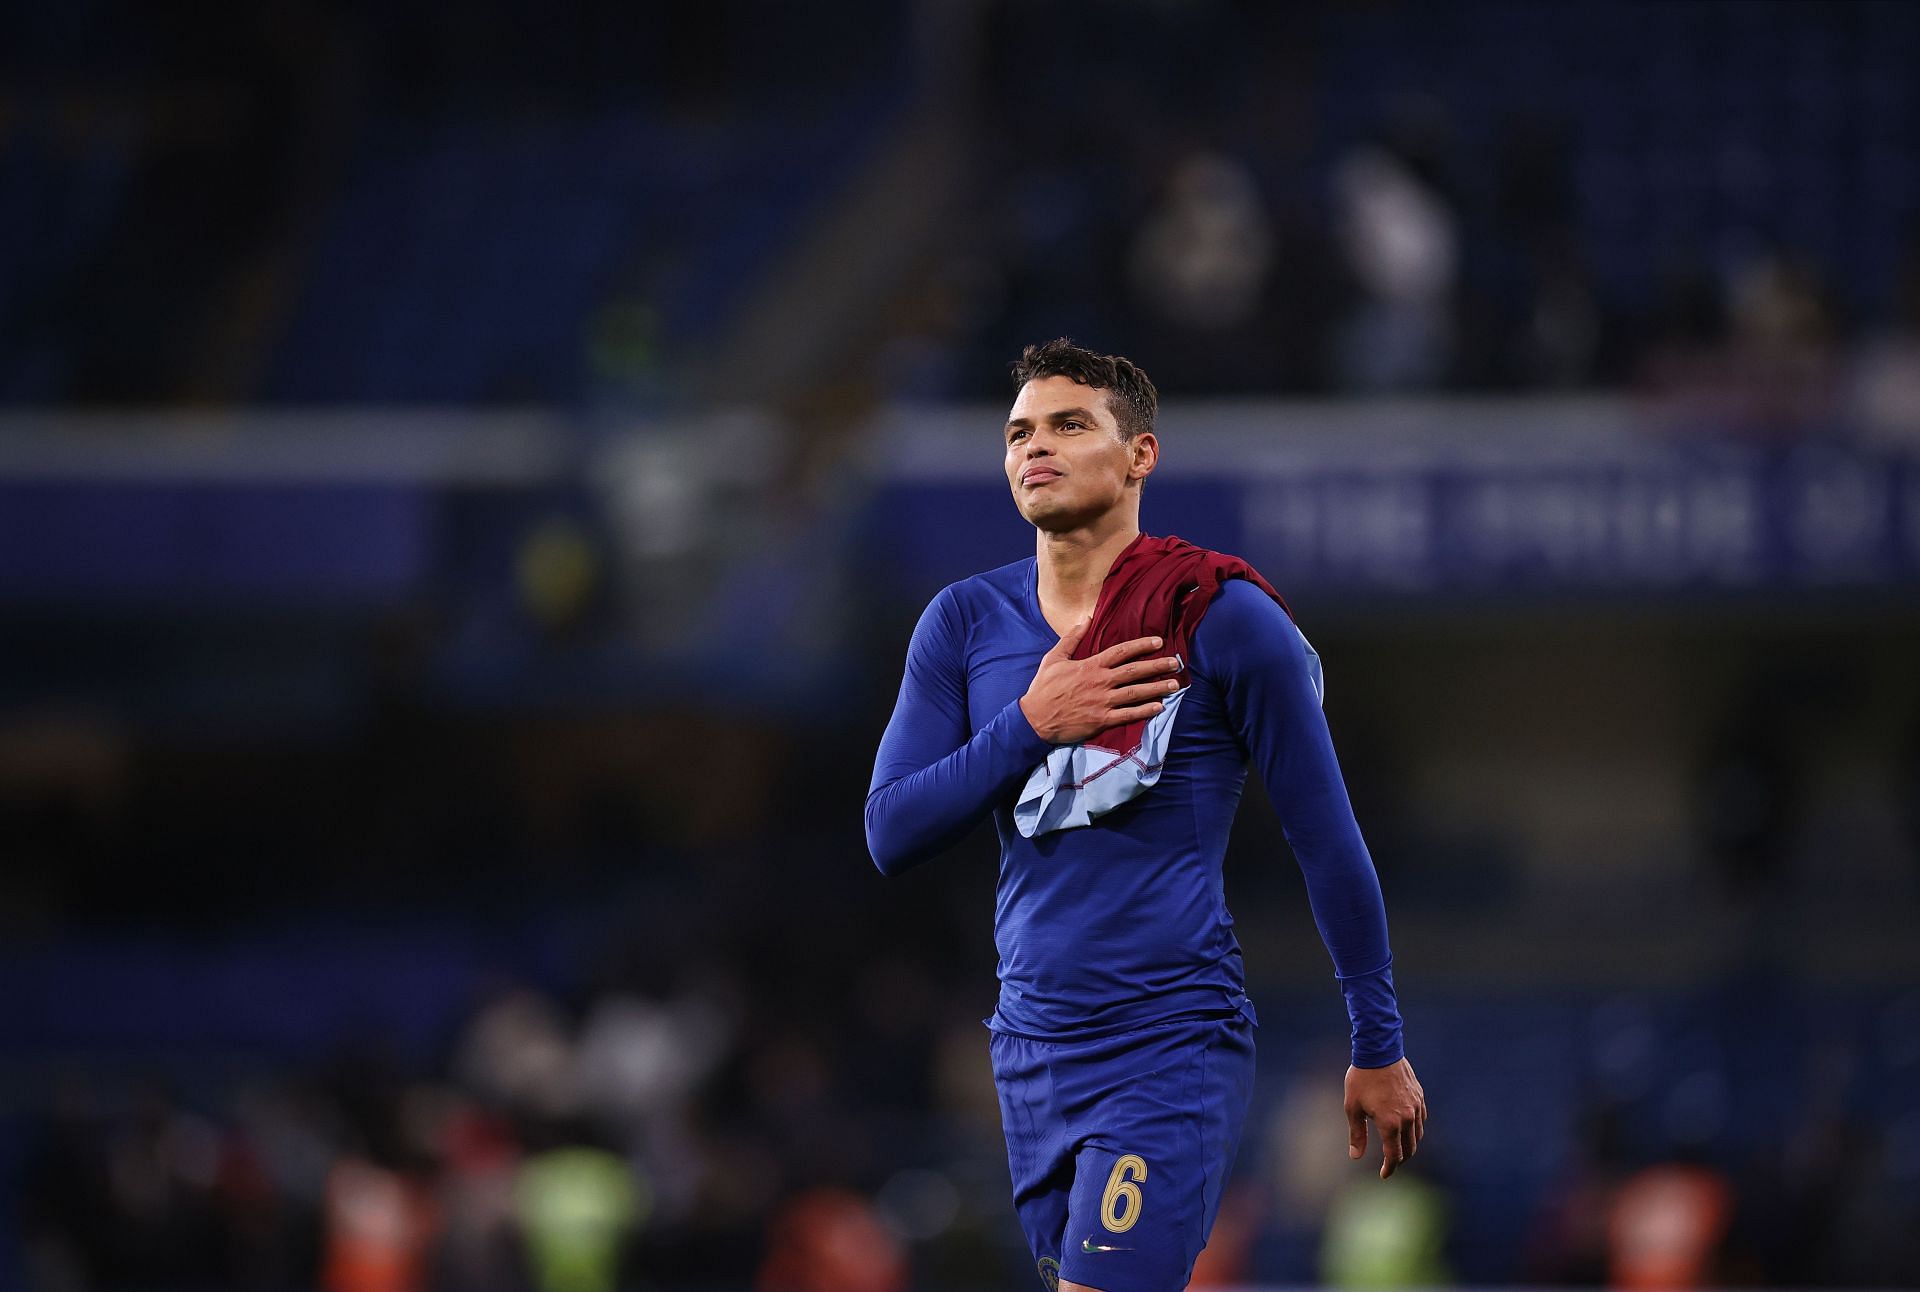 Thiago Silva could be on his way out of Stamford Bridge